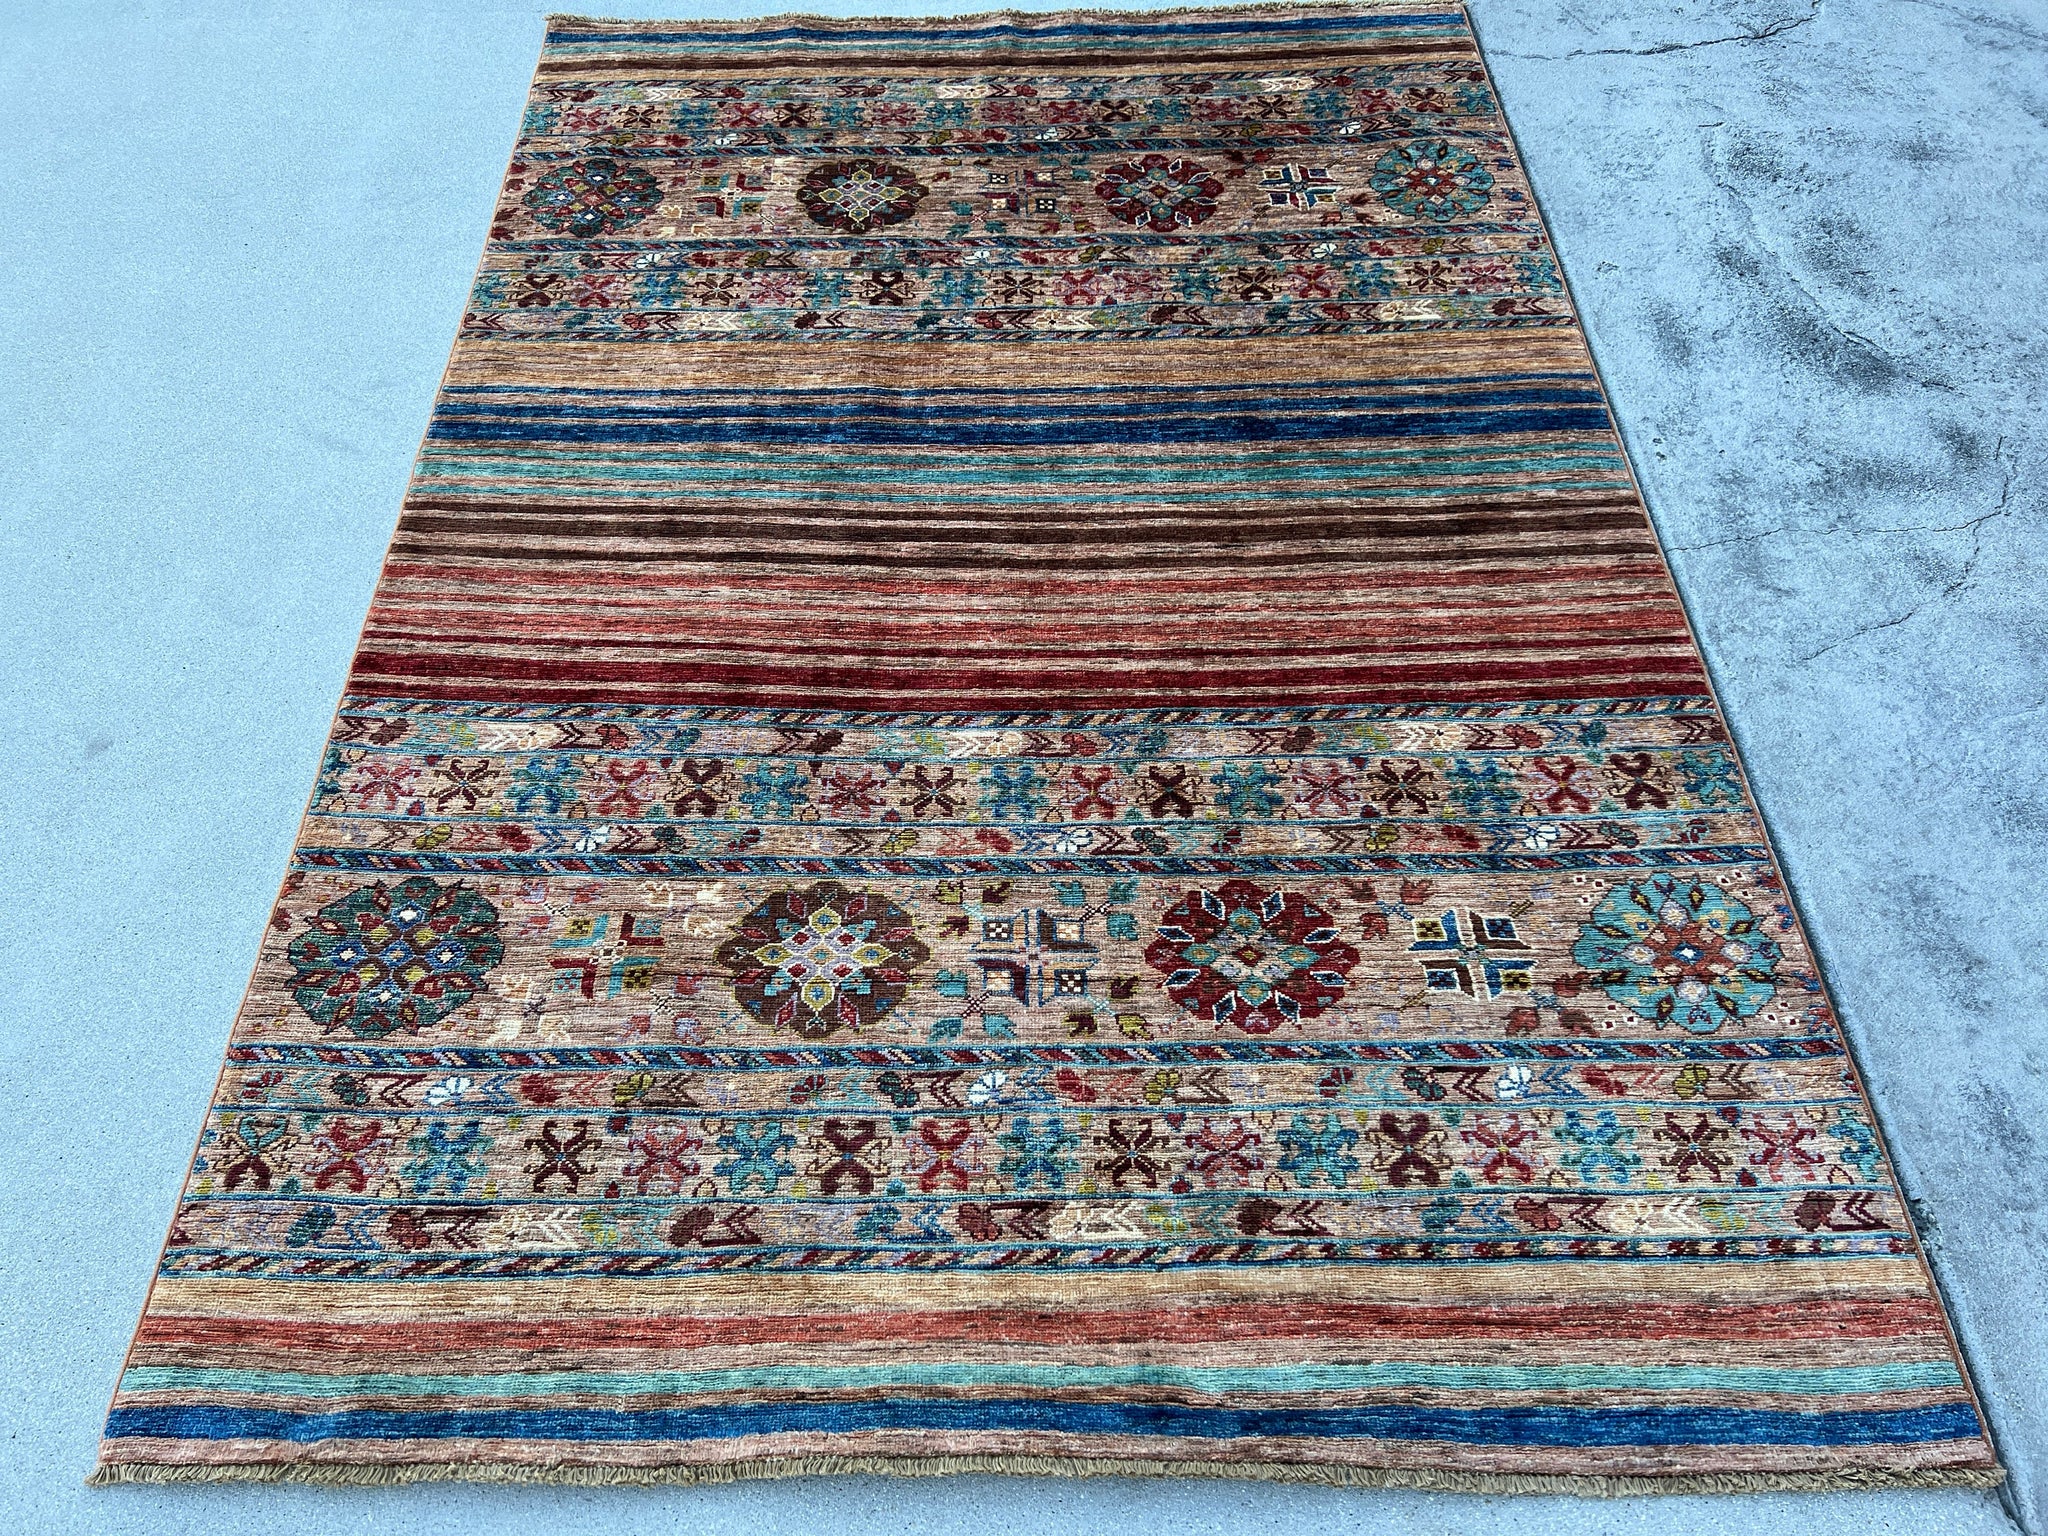 5x7 (150x215) Handmade Afghan Rug | Chocolate Brown Red Turquoise Teal Blue Olive Green Maroon Lavender Gold Ivory | Floral Tribal Wool